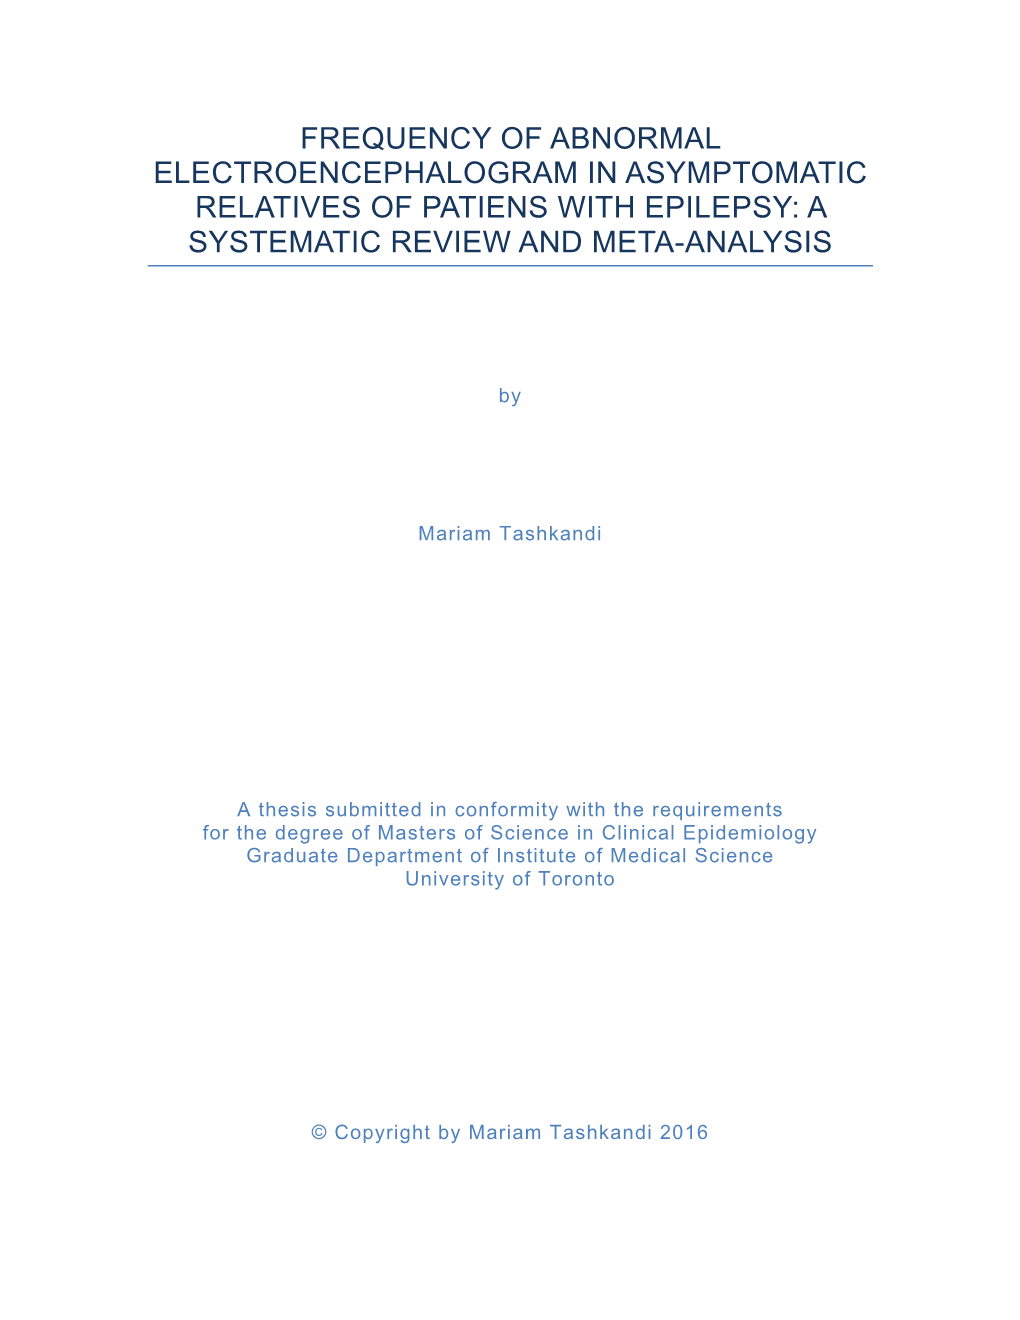 Frequency of Abnormal Electroencephalogram in Asymptomatic Relatives of Patiens with Epilepsy: a Systematic Review and Meta-Analysis